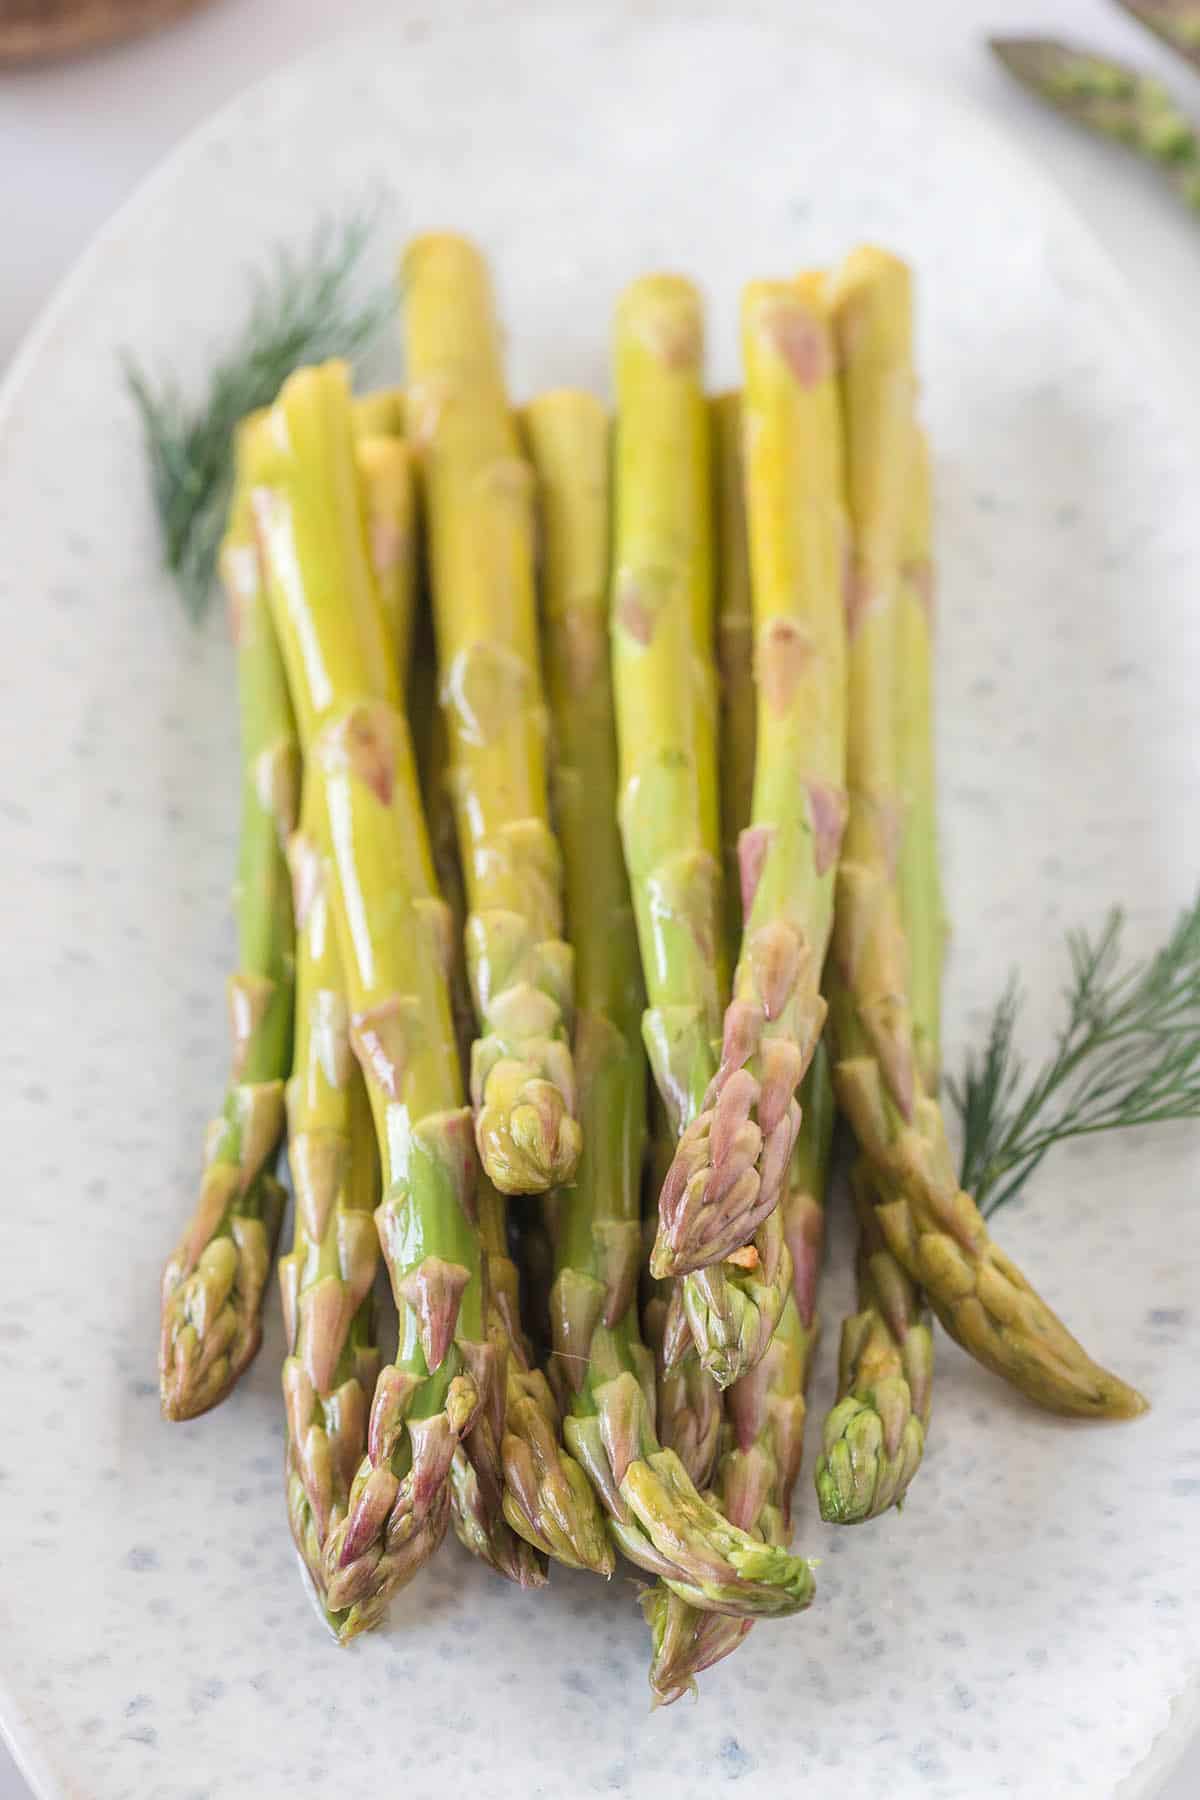 A platter piled with pickled asparagus.